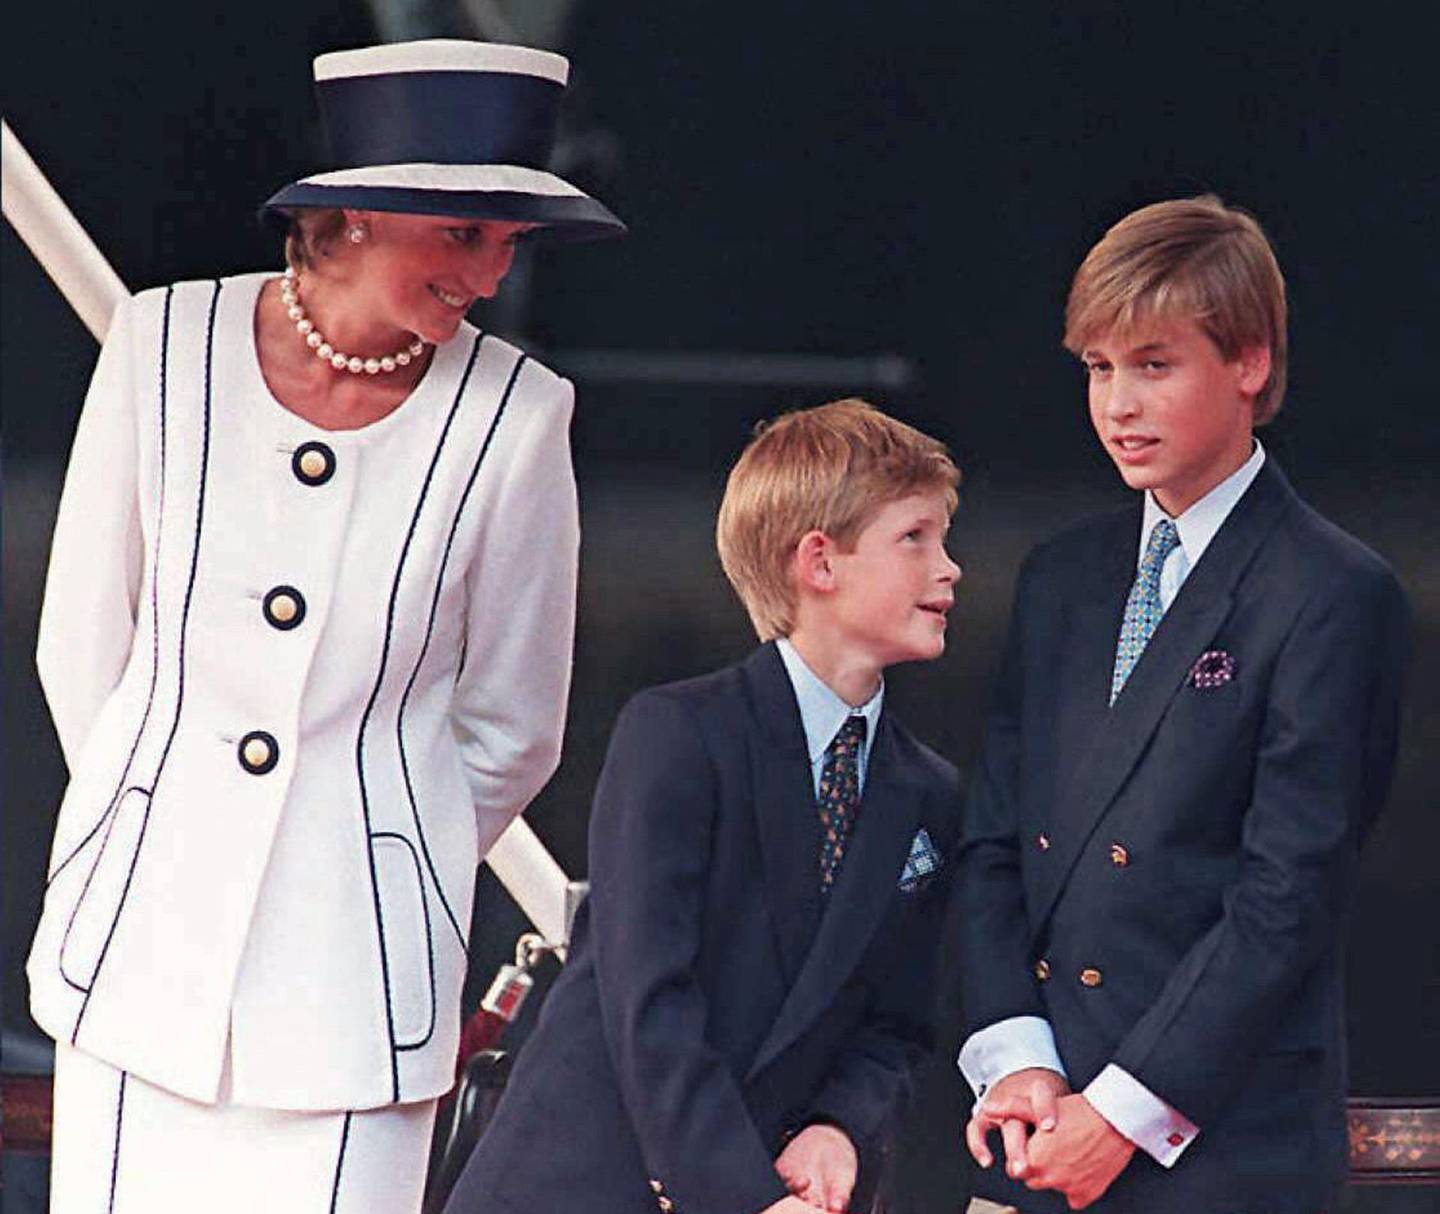 (FILES) This file photo taken on August 19, 1995 shows Britain's Diana, Princess of Wales (L), and her sons Prince Harry, (C) and Prince William, as they gather for the commemorations of VJ Day in London.
Two decades on from the death of princess Diana, her sons Princes William and Harry are working to keep her legacy alive with unusually emotional tributes after years of official silence. William was 15 and Harry 12 when Diana died in a car crash in Paris on August 31, 1997. / AFP PHOTO / JOHNNY EGGITT